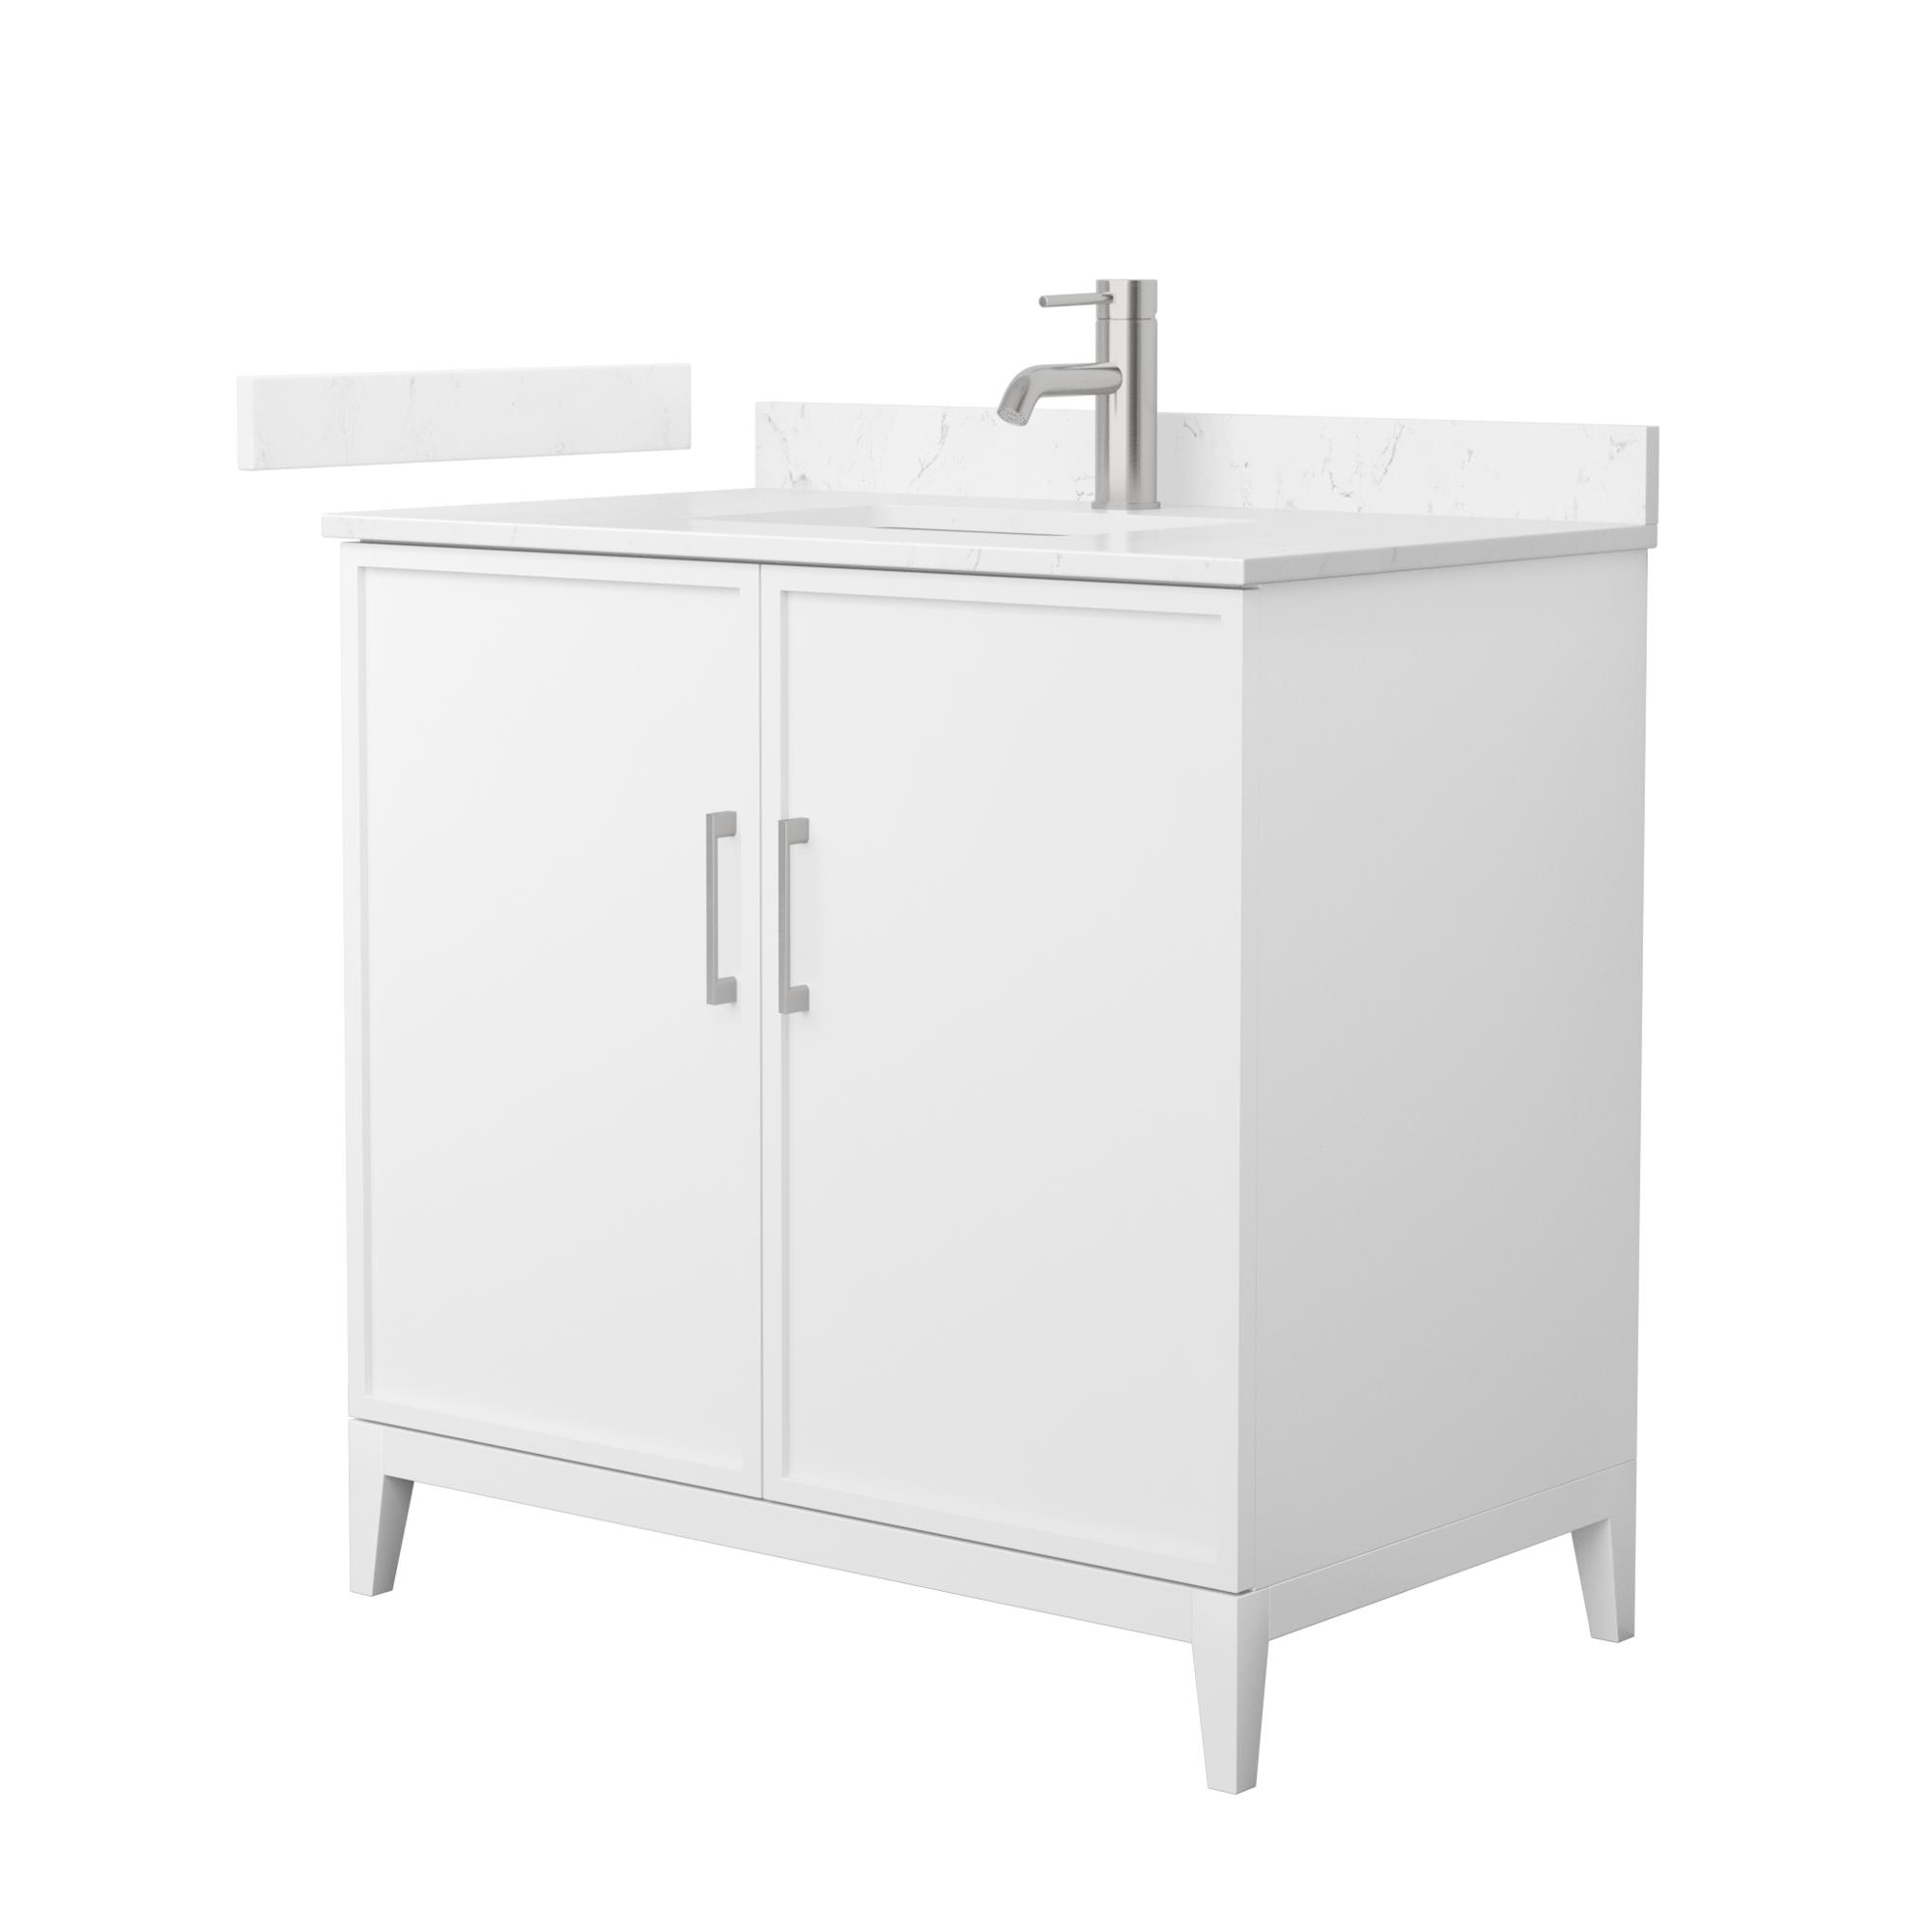 36" Transitional Single Vanity Base in White, 7 Top Options with 2 Hardware Option